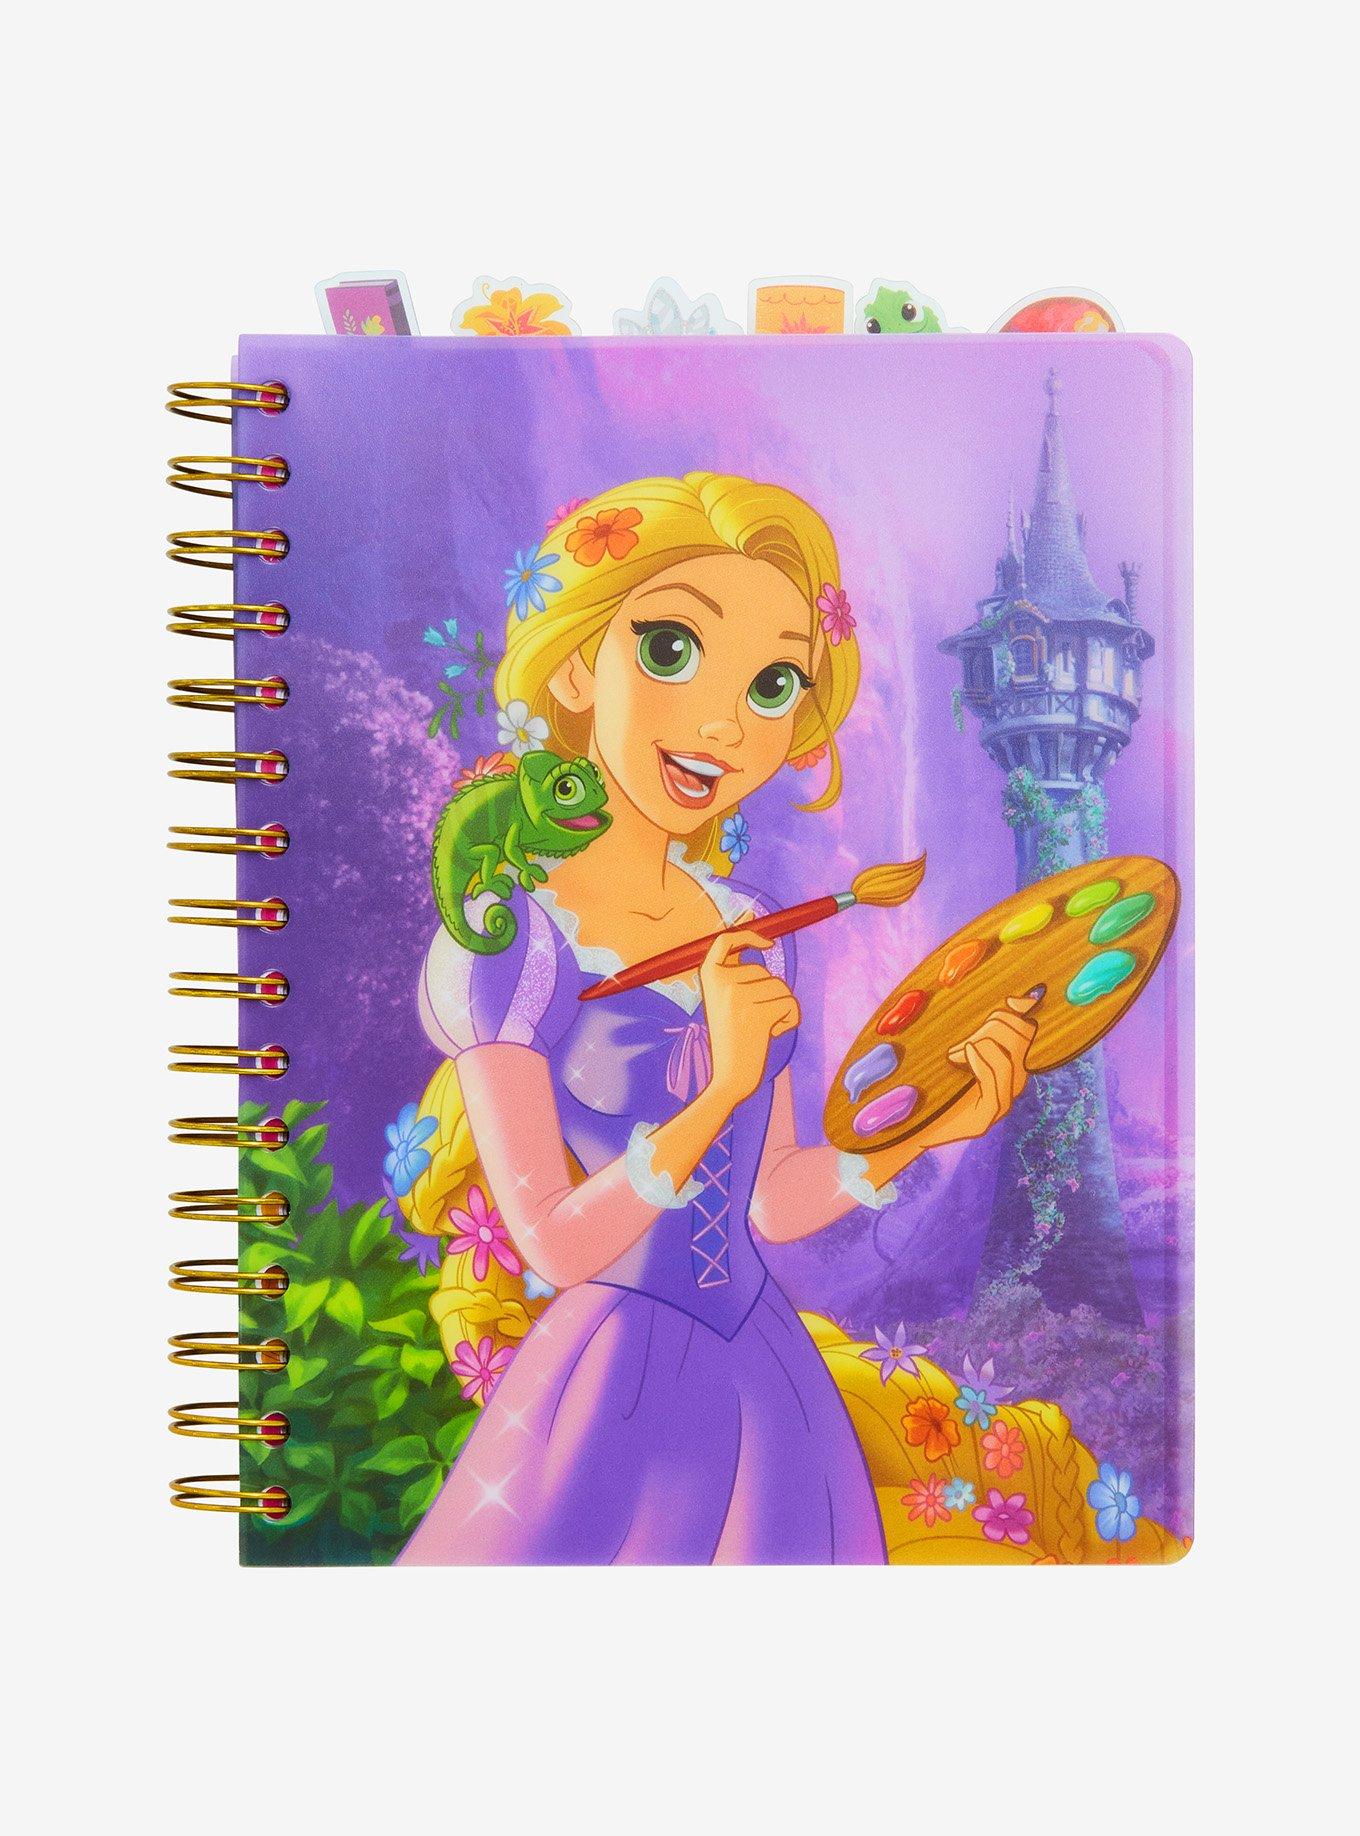 PASCAL RAPUNZEL TANGLED MOVIE SINGLE LIGHT SWITCH PLATE GIRLS ROOM  DECORATION